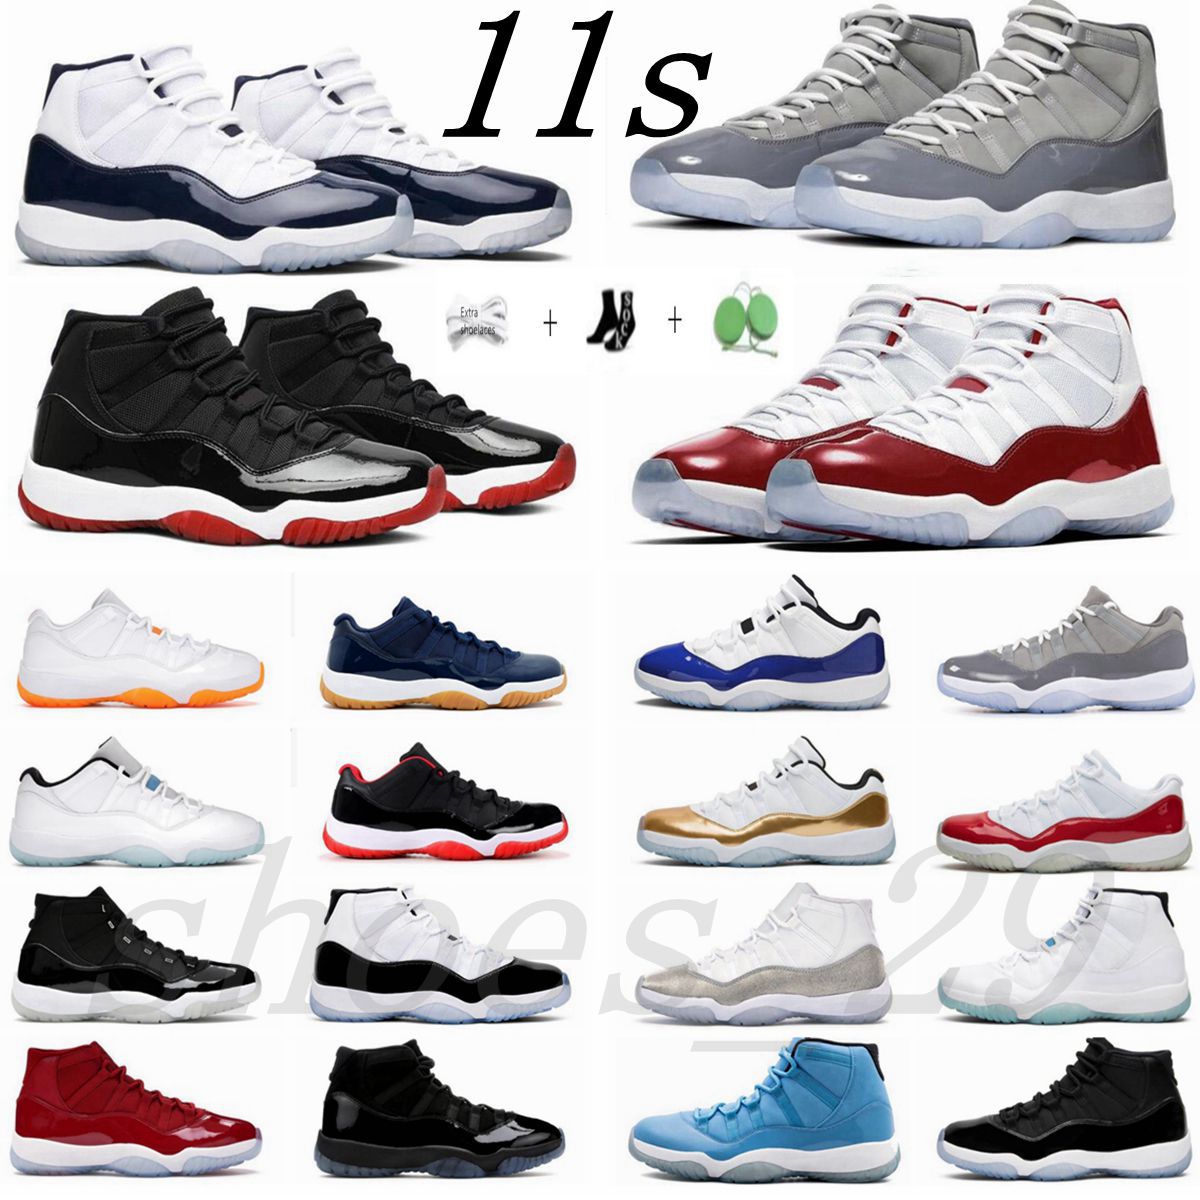 

Mens women Basketball Shoes 11s Cherry Midnight Navy Cool Grey Pure Violet Citrus Legend Gamma UNC Bred Low Cap Gown Concord Space Jam Trainer Sports Sneakers, Original shoe box